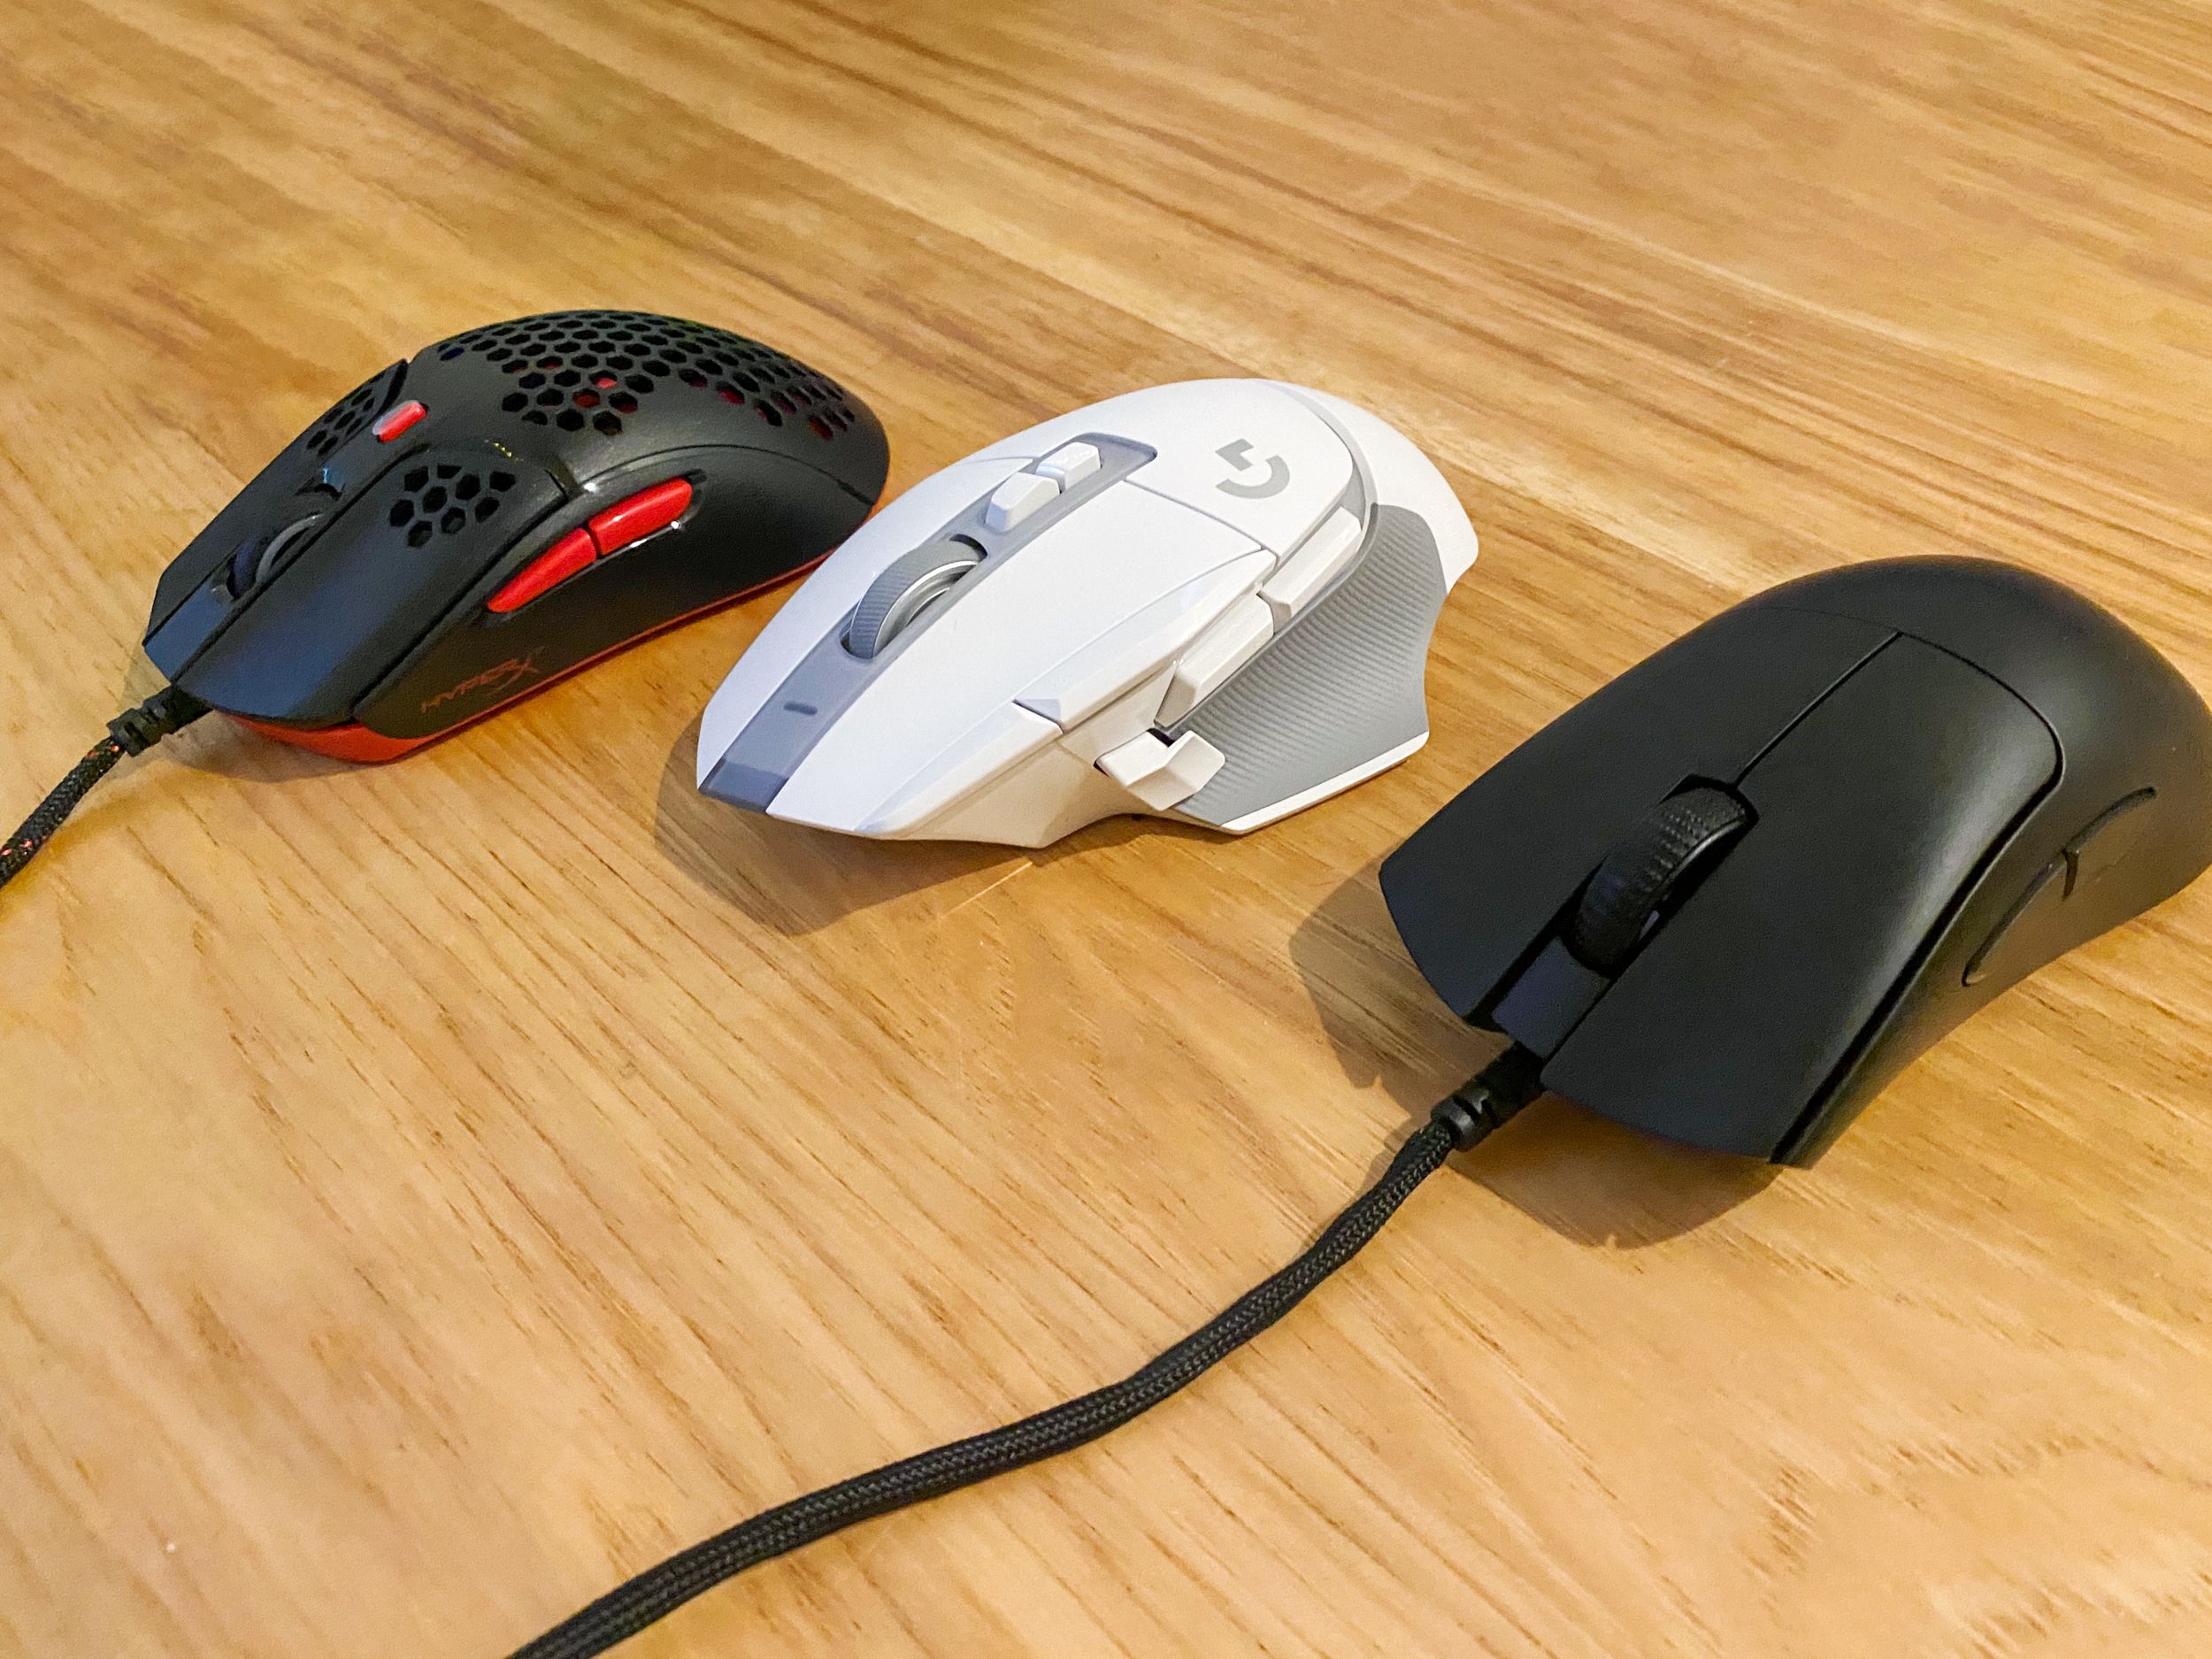 Test Your Mouse Dragging Capability. - Best Way to Test Your Mouse